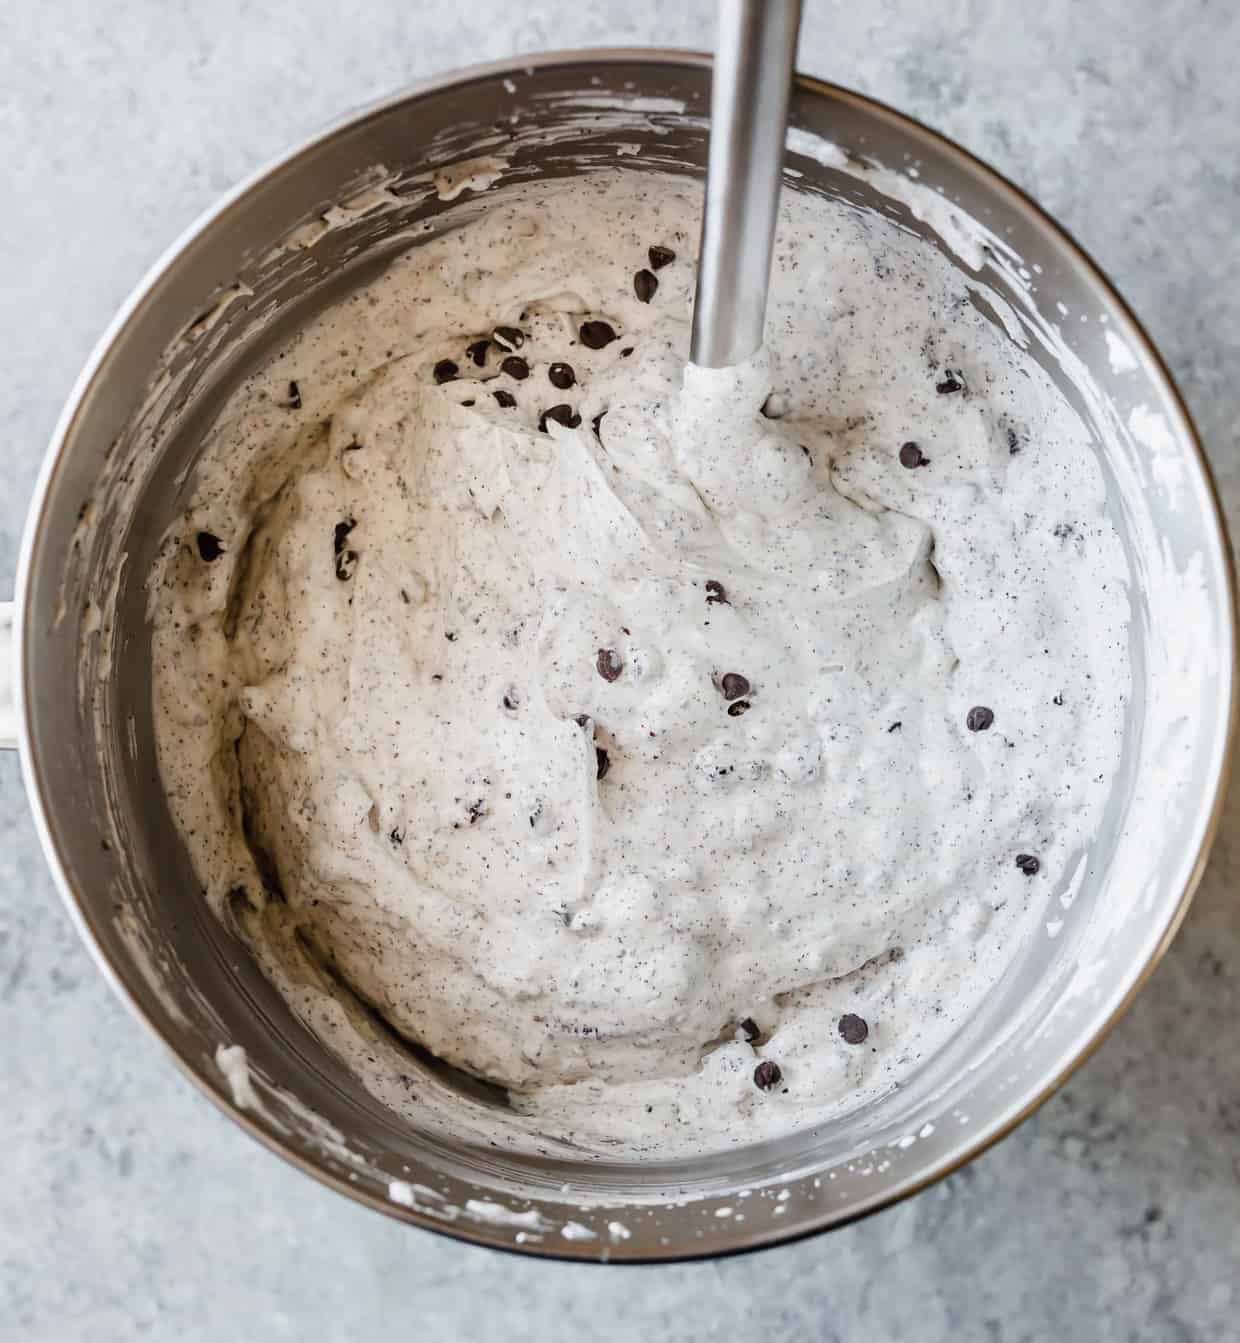 Freshly whipped cream and sweetened condensed milk in a metal bowl, with crushed Oreos and mini chocolate chips mixed into the contents.